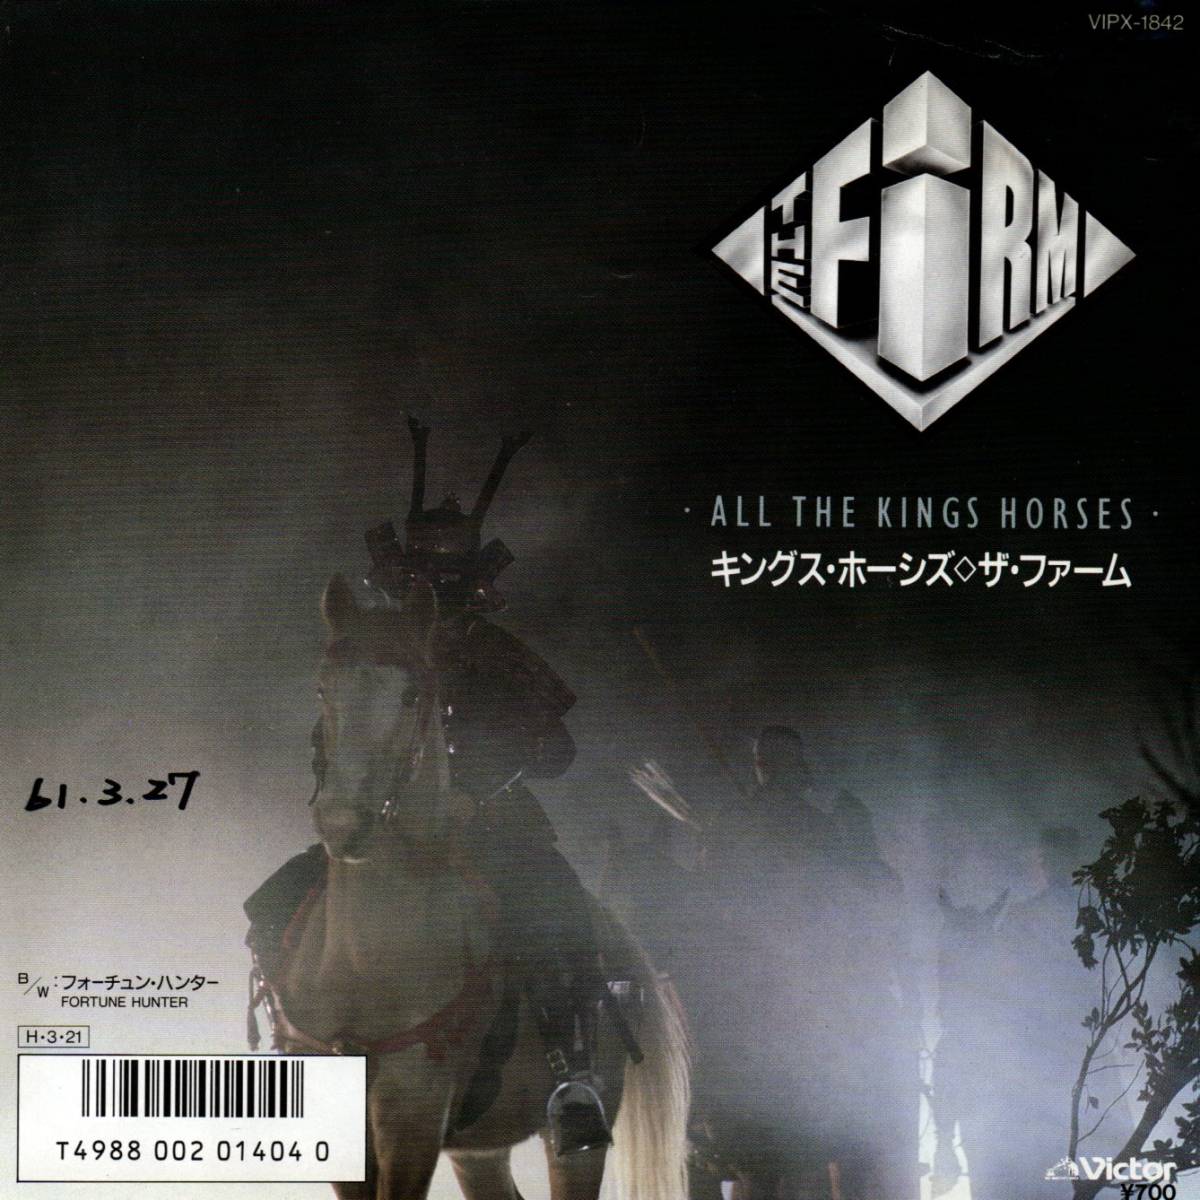 The Firm 「All The Kings Horses/ Fortune Hunter」国内盤サンプルEPレコード　（Paul Rodgers, Jimmy Page関連)_画像1